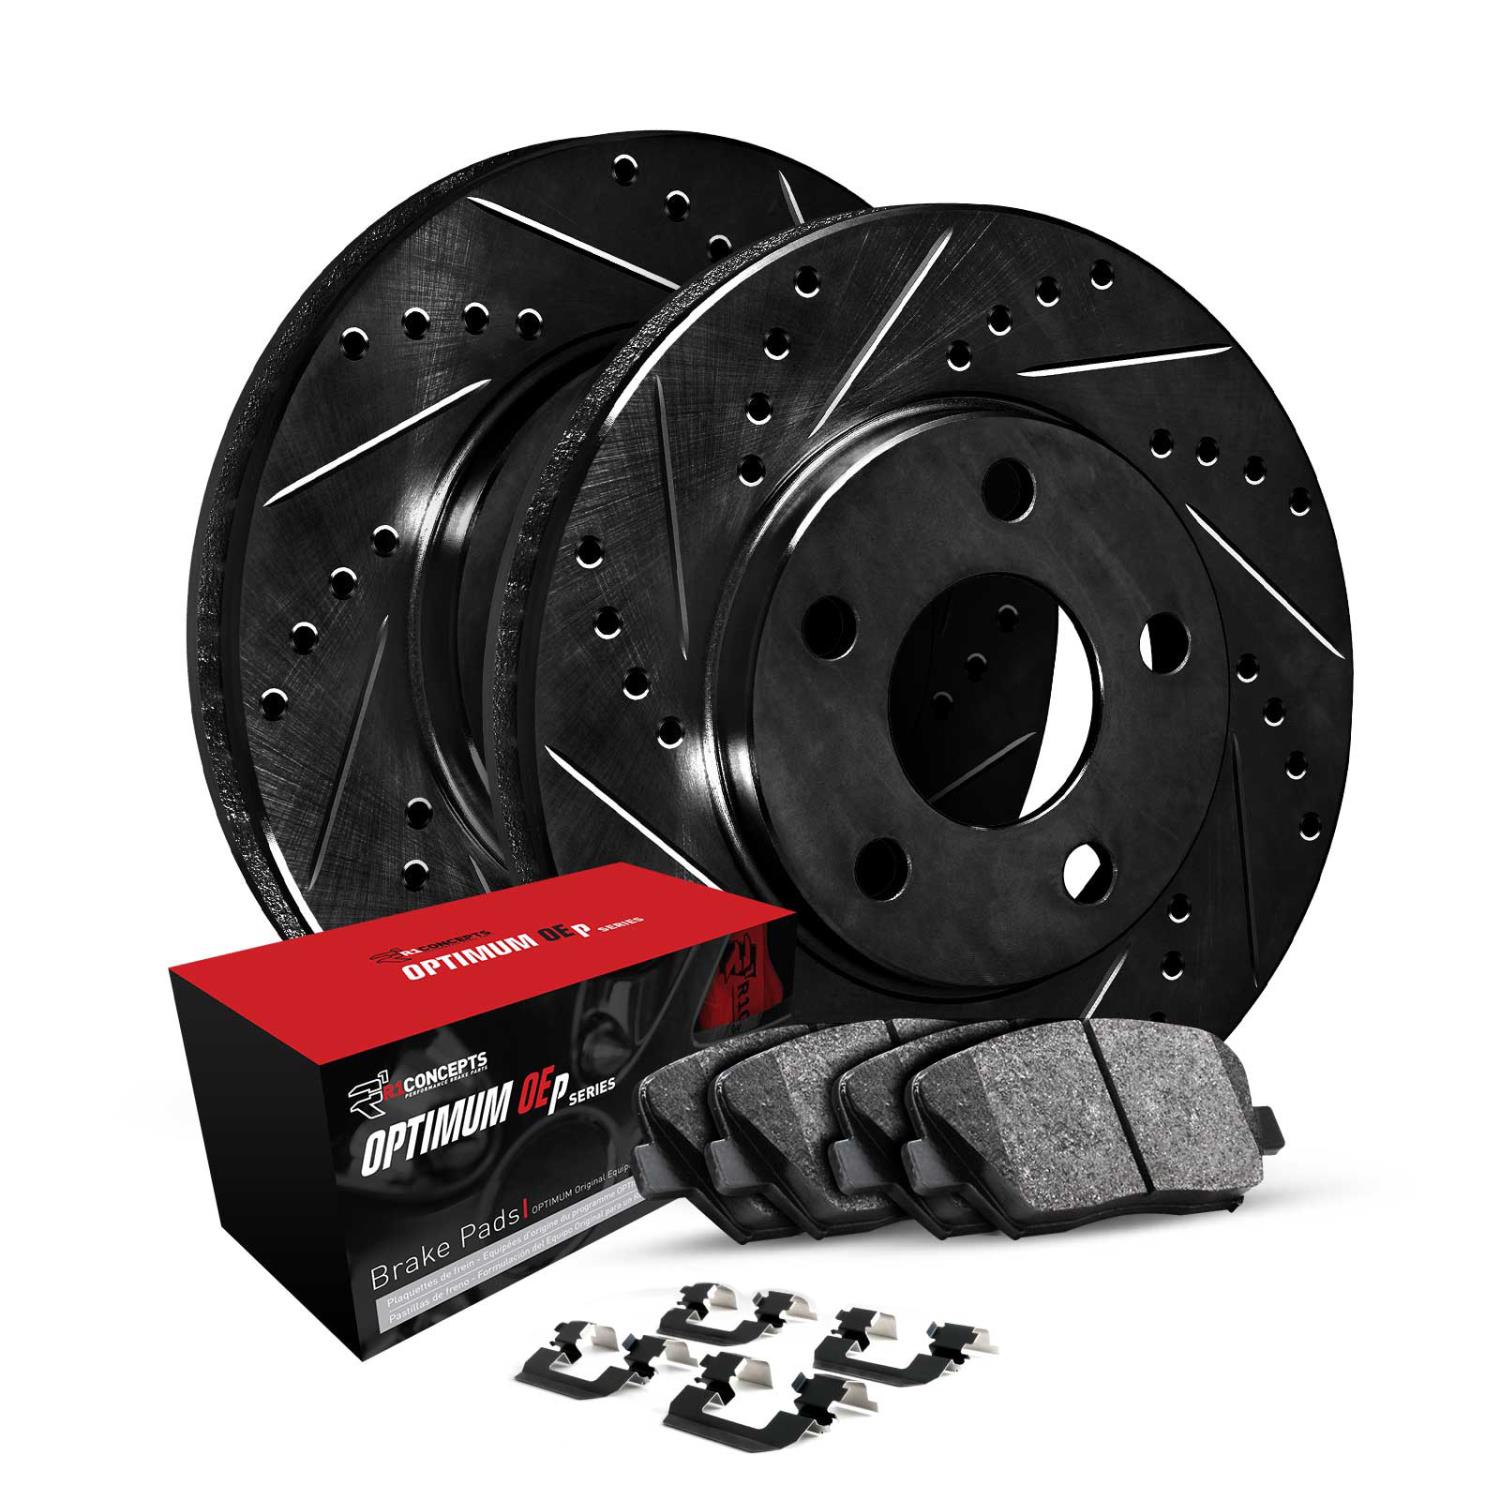 E-Line Drilled & Slotted Black Rotors w/5000 Oep Pads & Hardware Kit, Fits Select Fits Multiple Makes/Models, Position: Rear